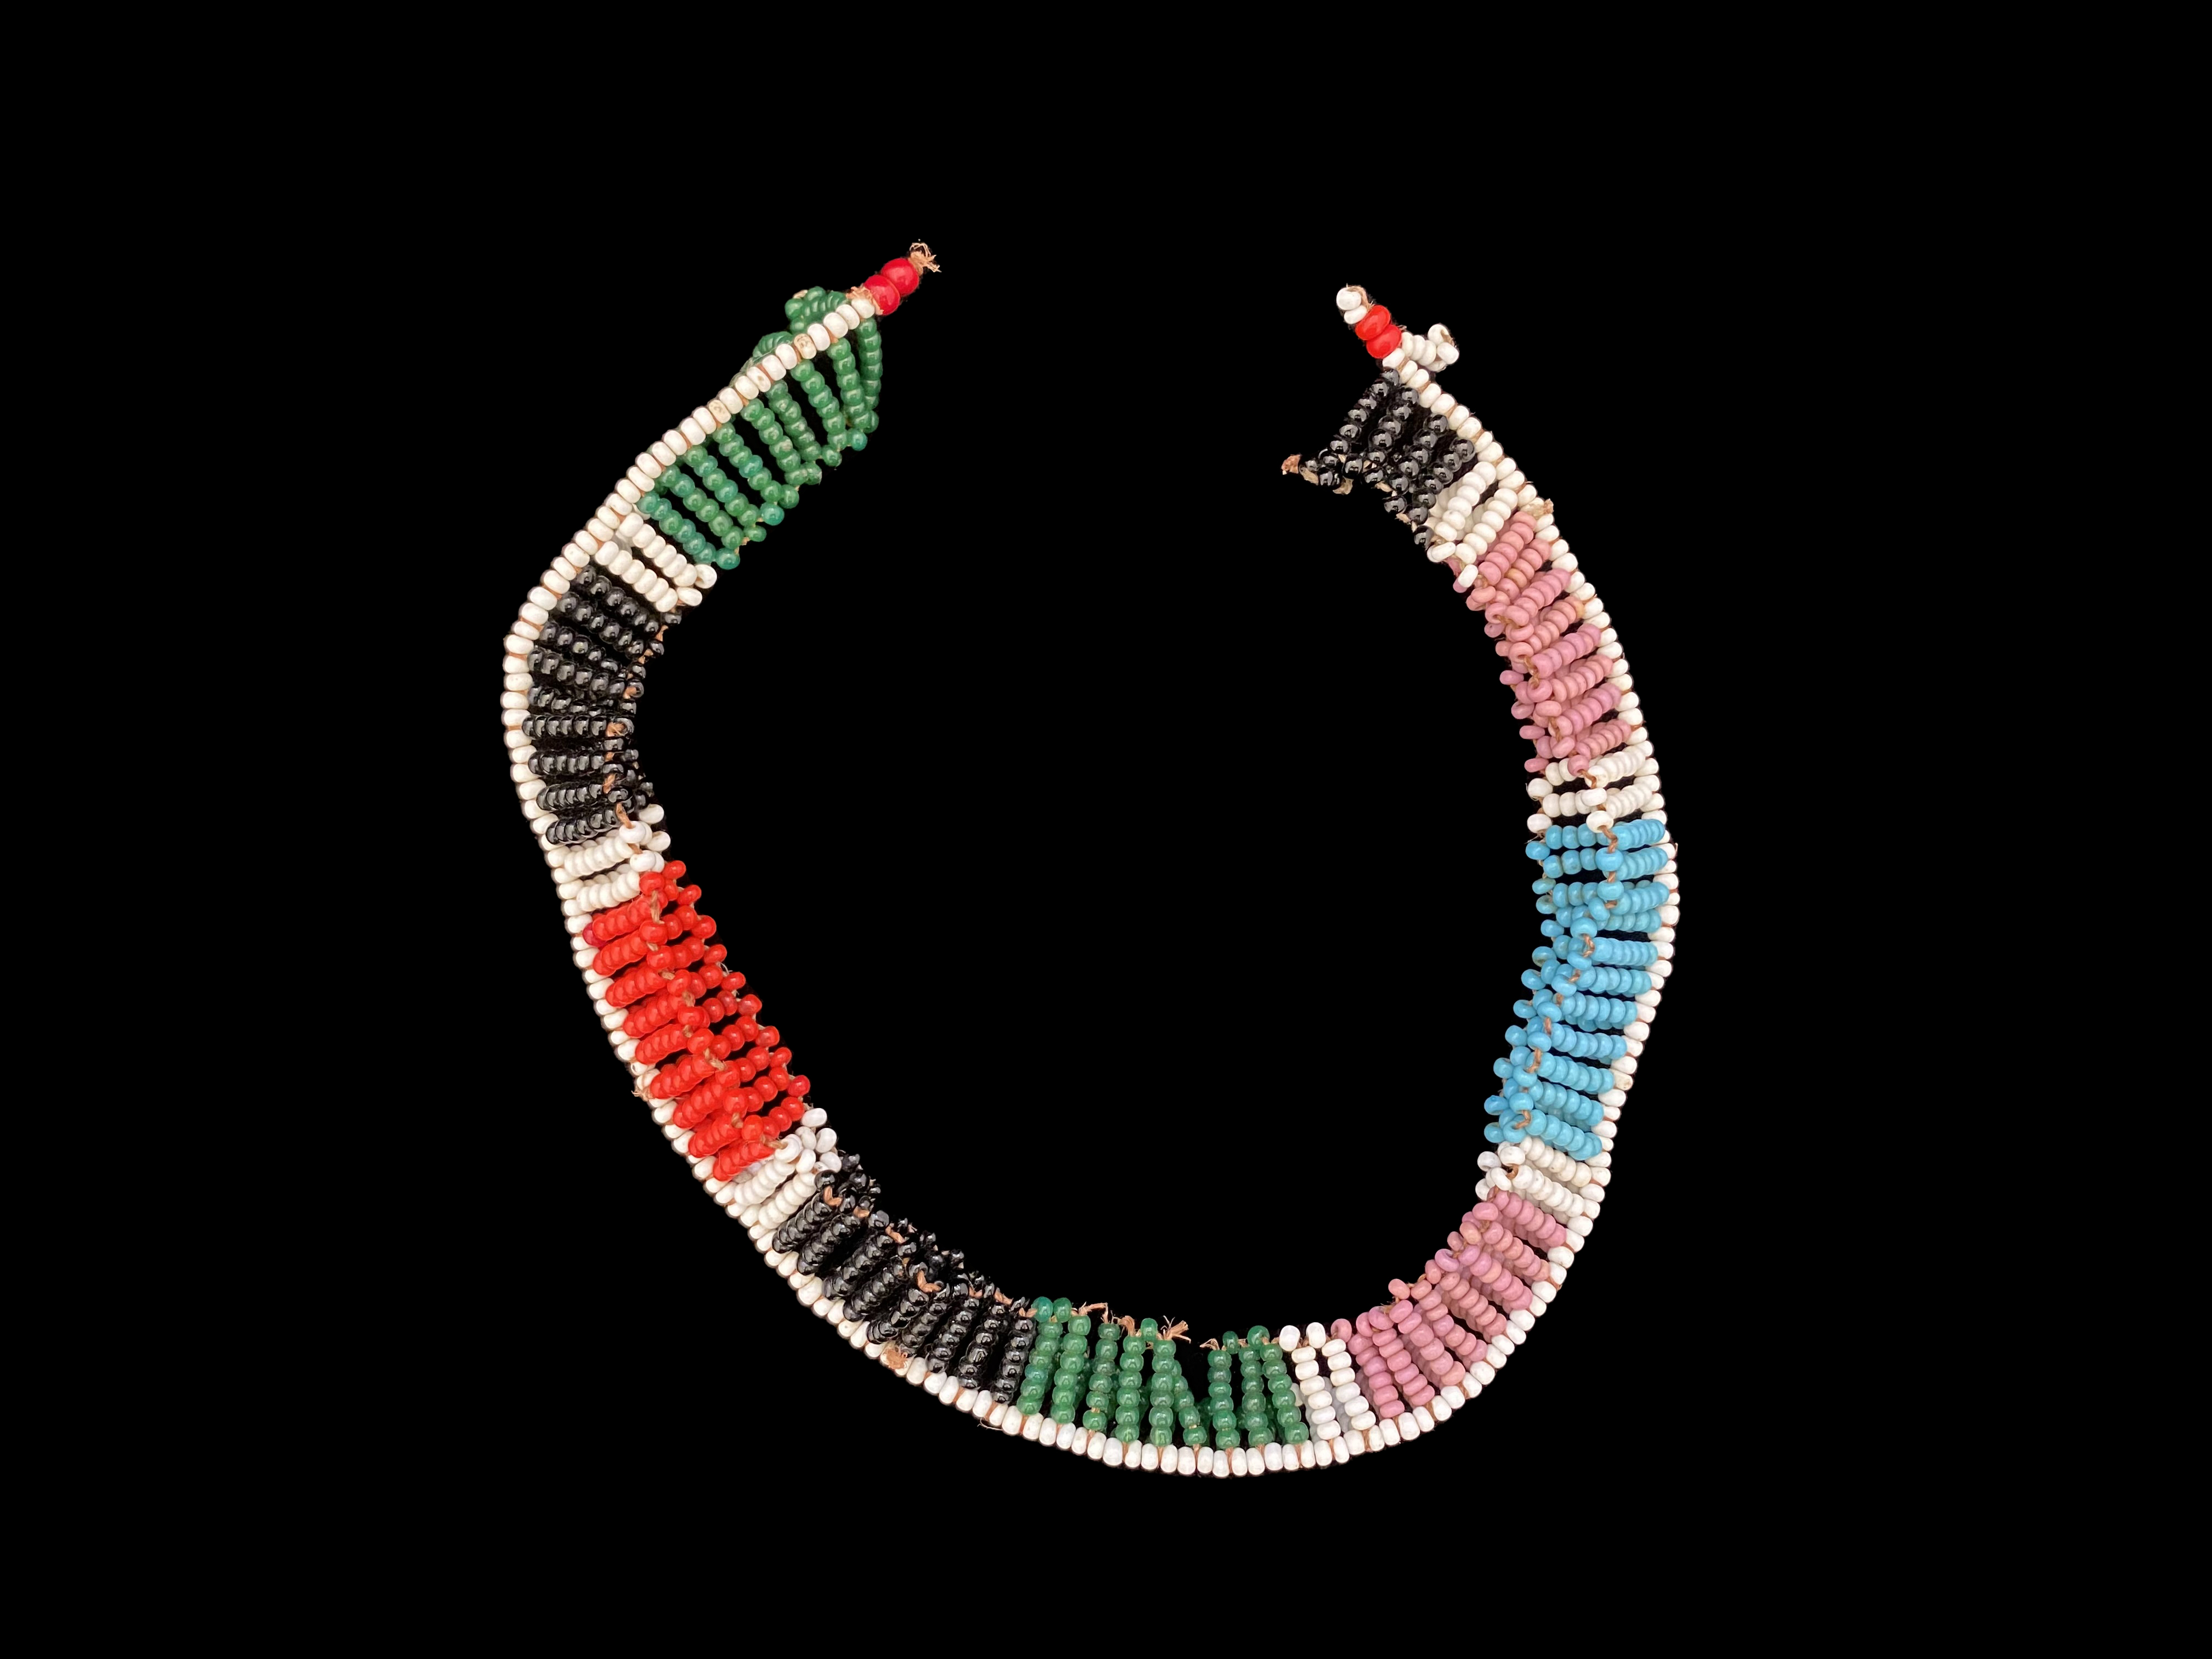 Beaded Necklace - Zulu People, South Africa (3662)